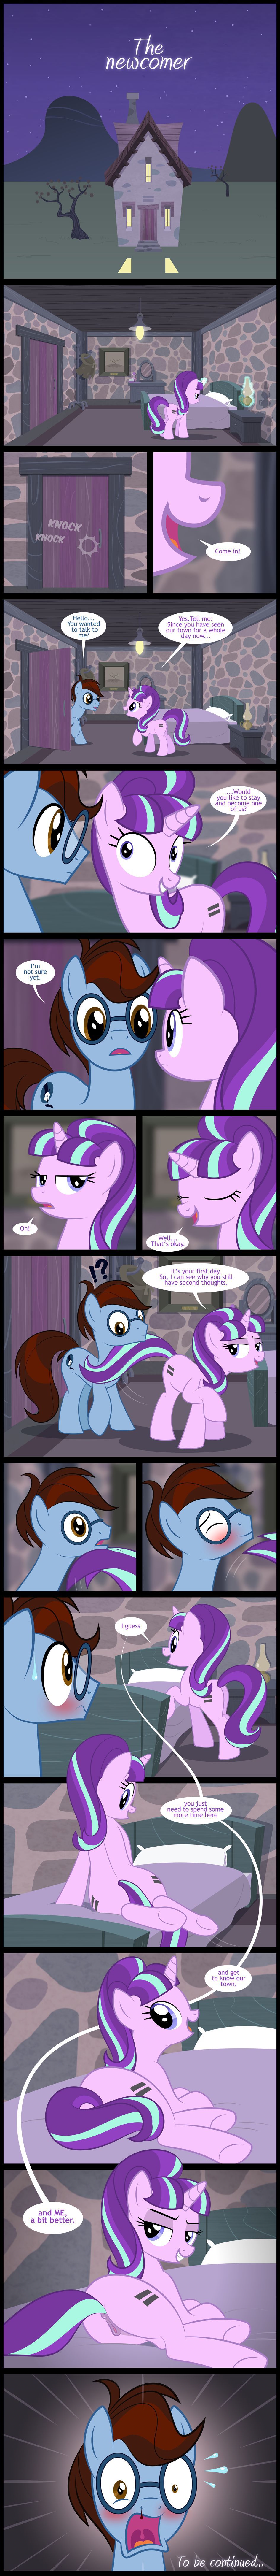 [Culu-Bluebeaver] The Newcomer (My Little Pony: Friendship is Magic) 2